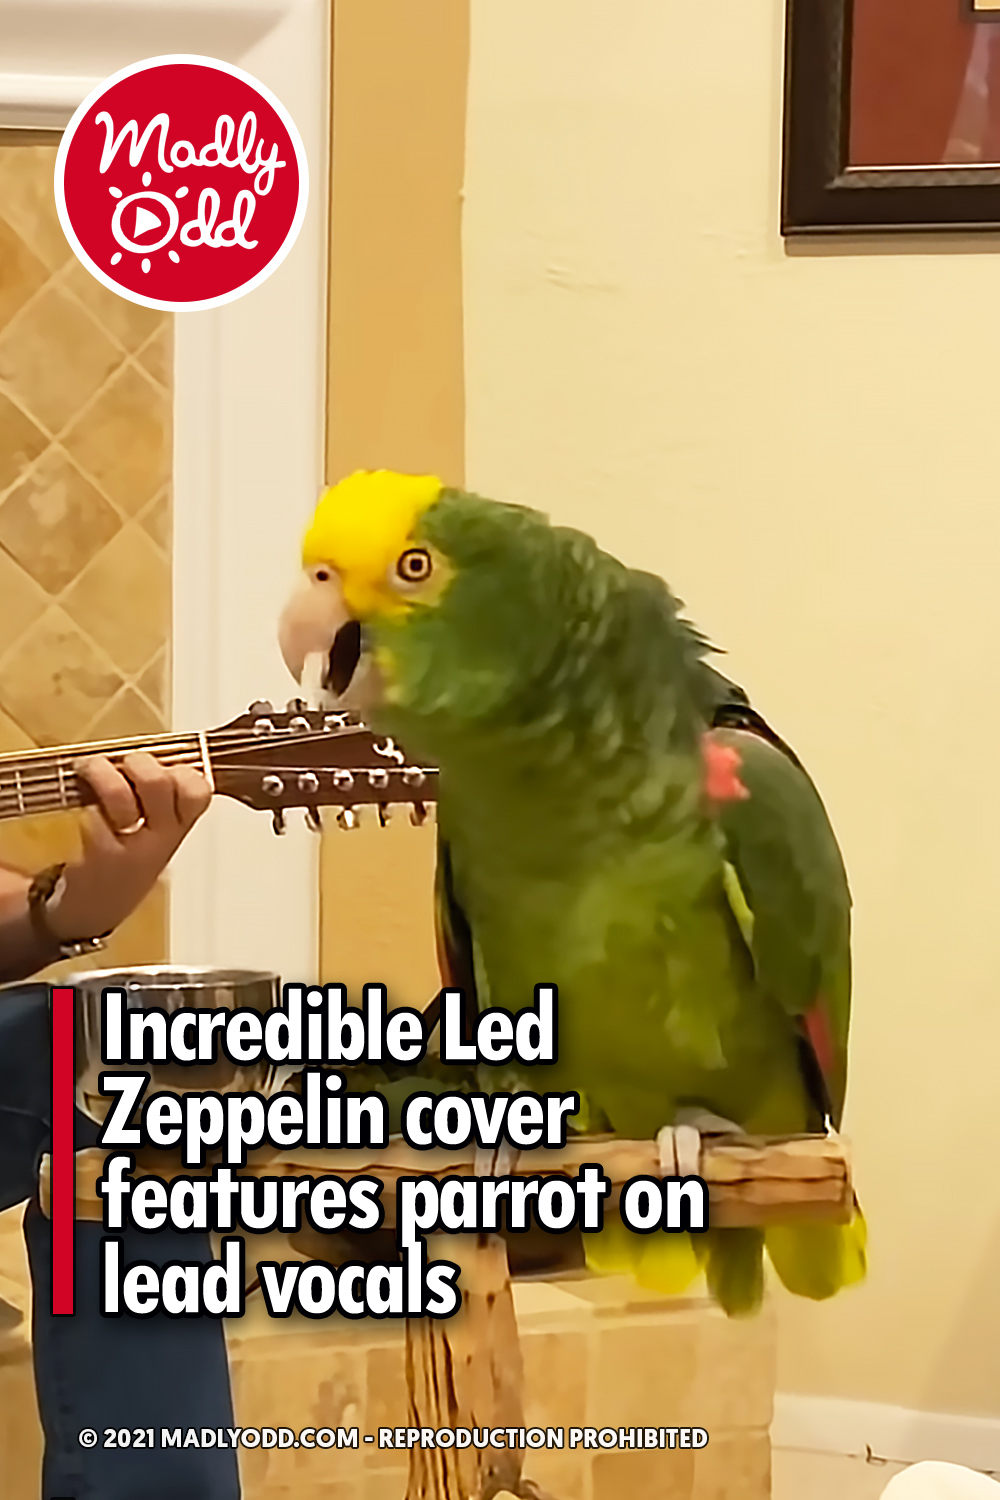 Incredible Led Zeppelin cover features parrot on lead vocals